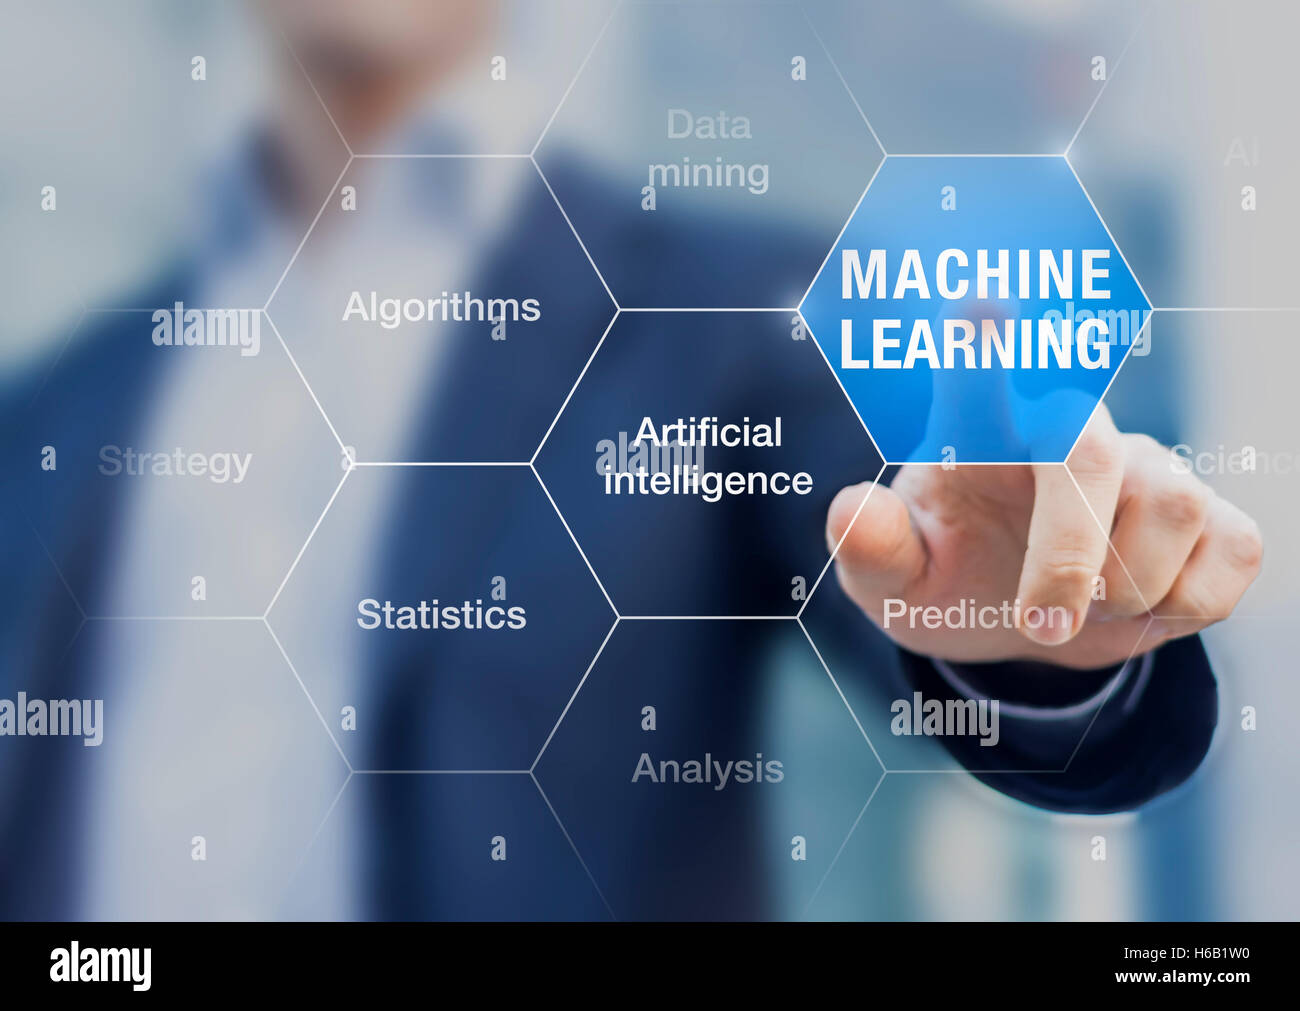 Concept about machine learning to improve artificial intelligence ability for predictions Stock Photo